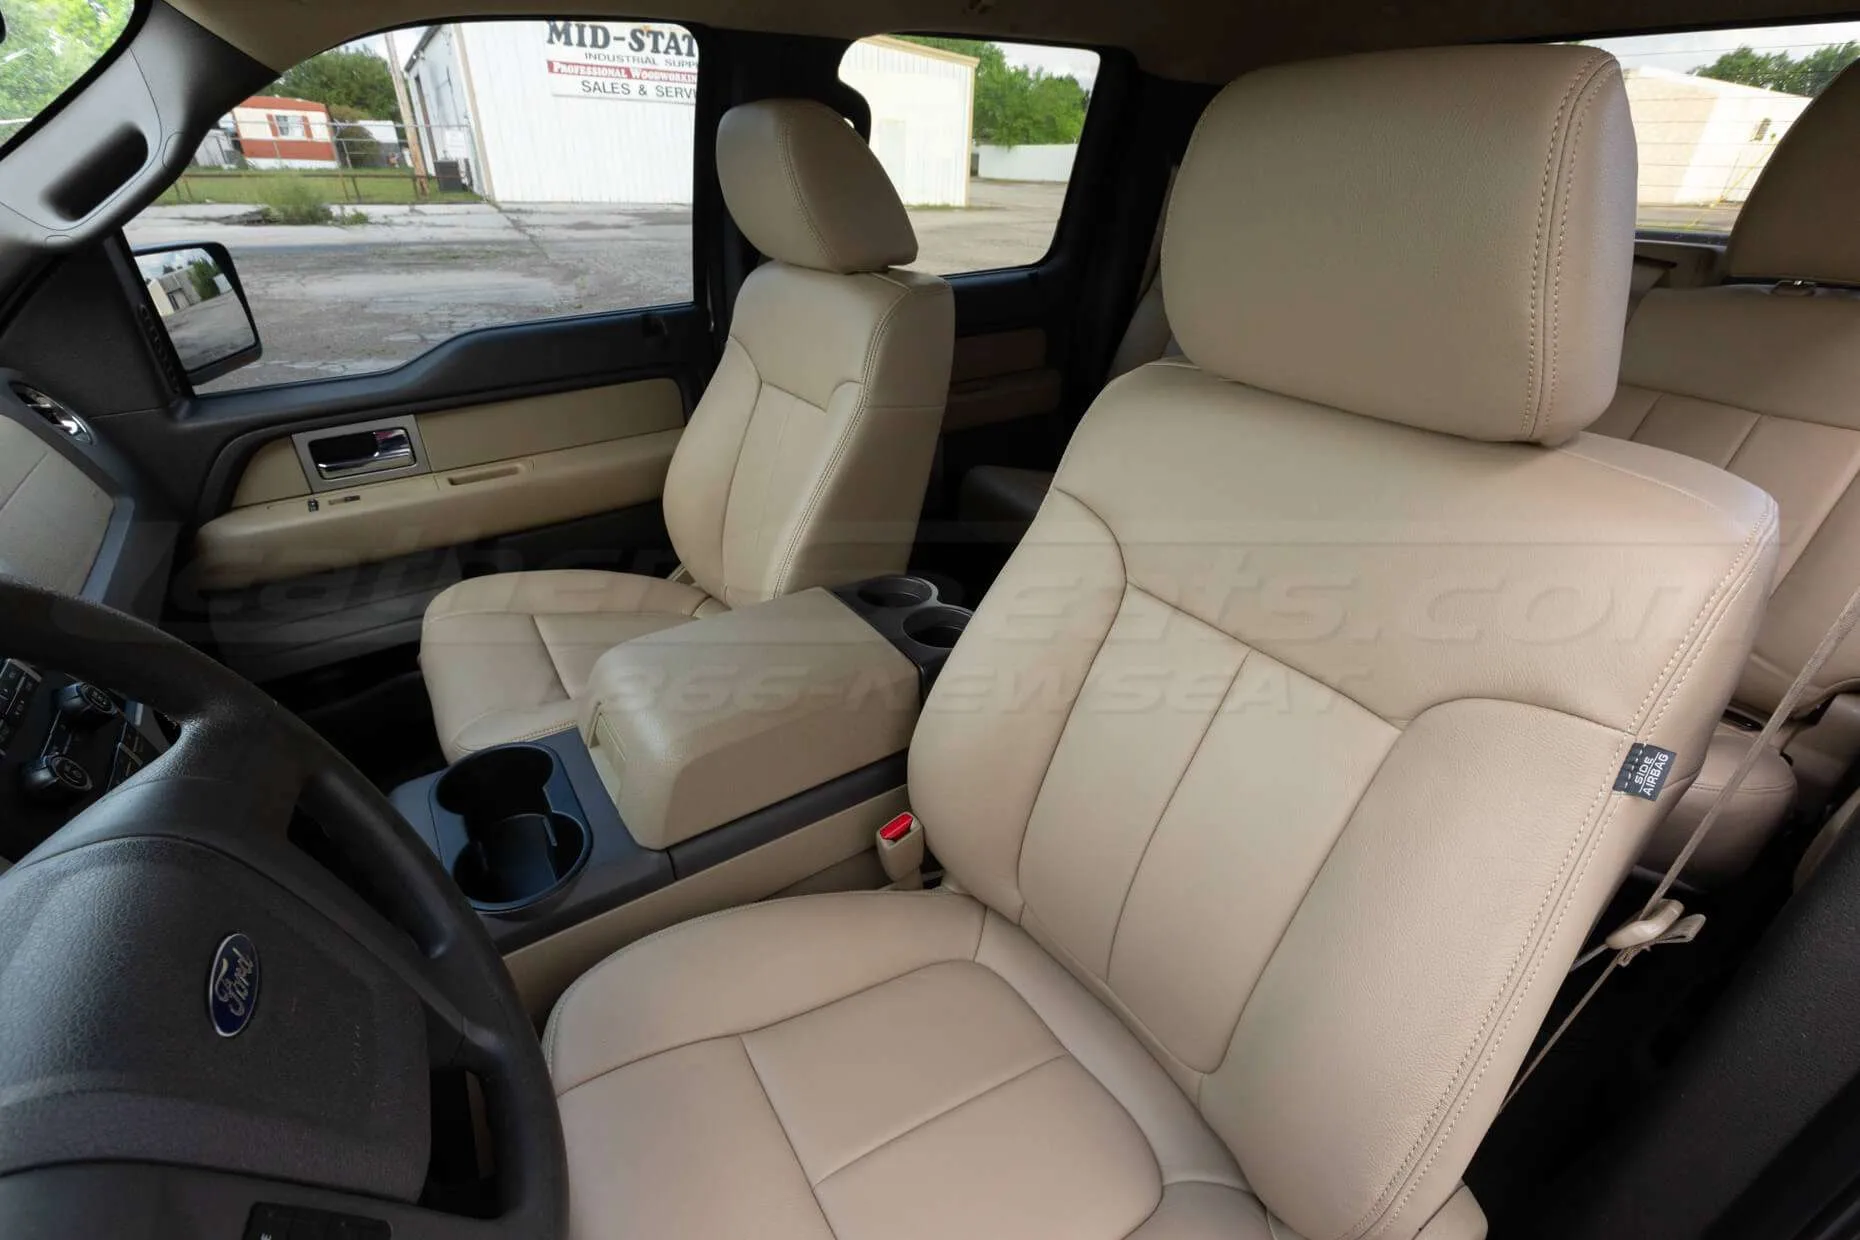 Ford F-150 Leather Upholstery Kit - Sandstone - Installed - Front interior with console